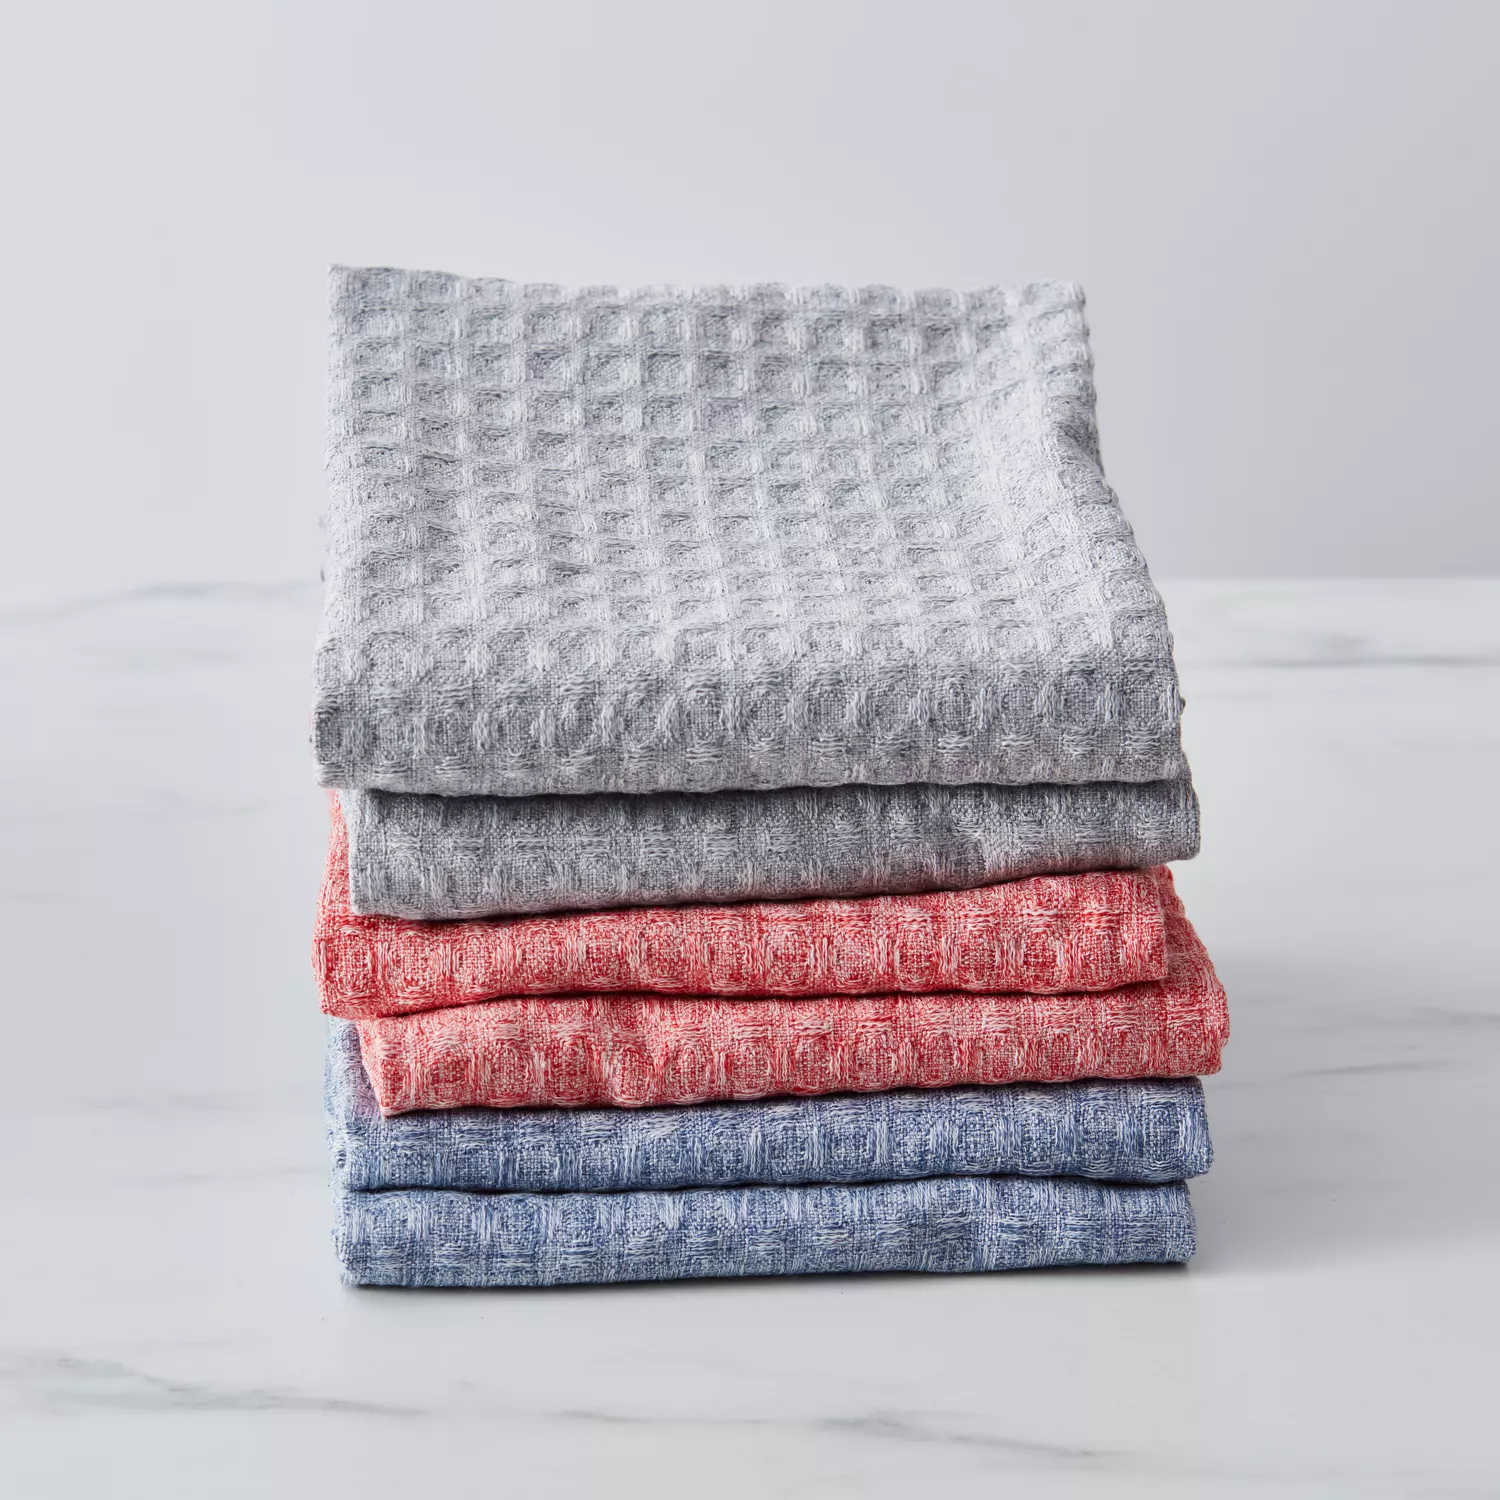 Sur La Table Recycled Waffle-Weave Towels, Set of 3